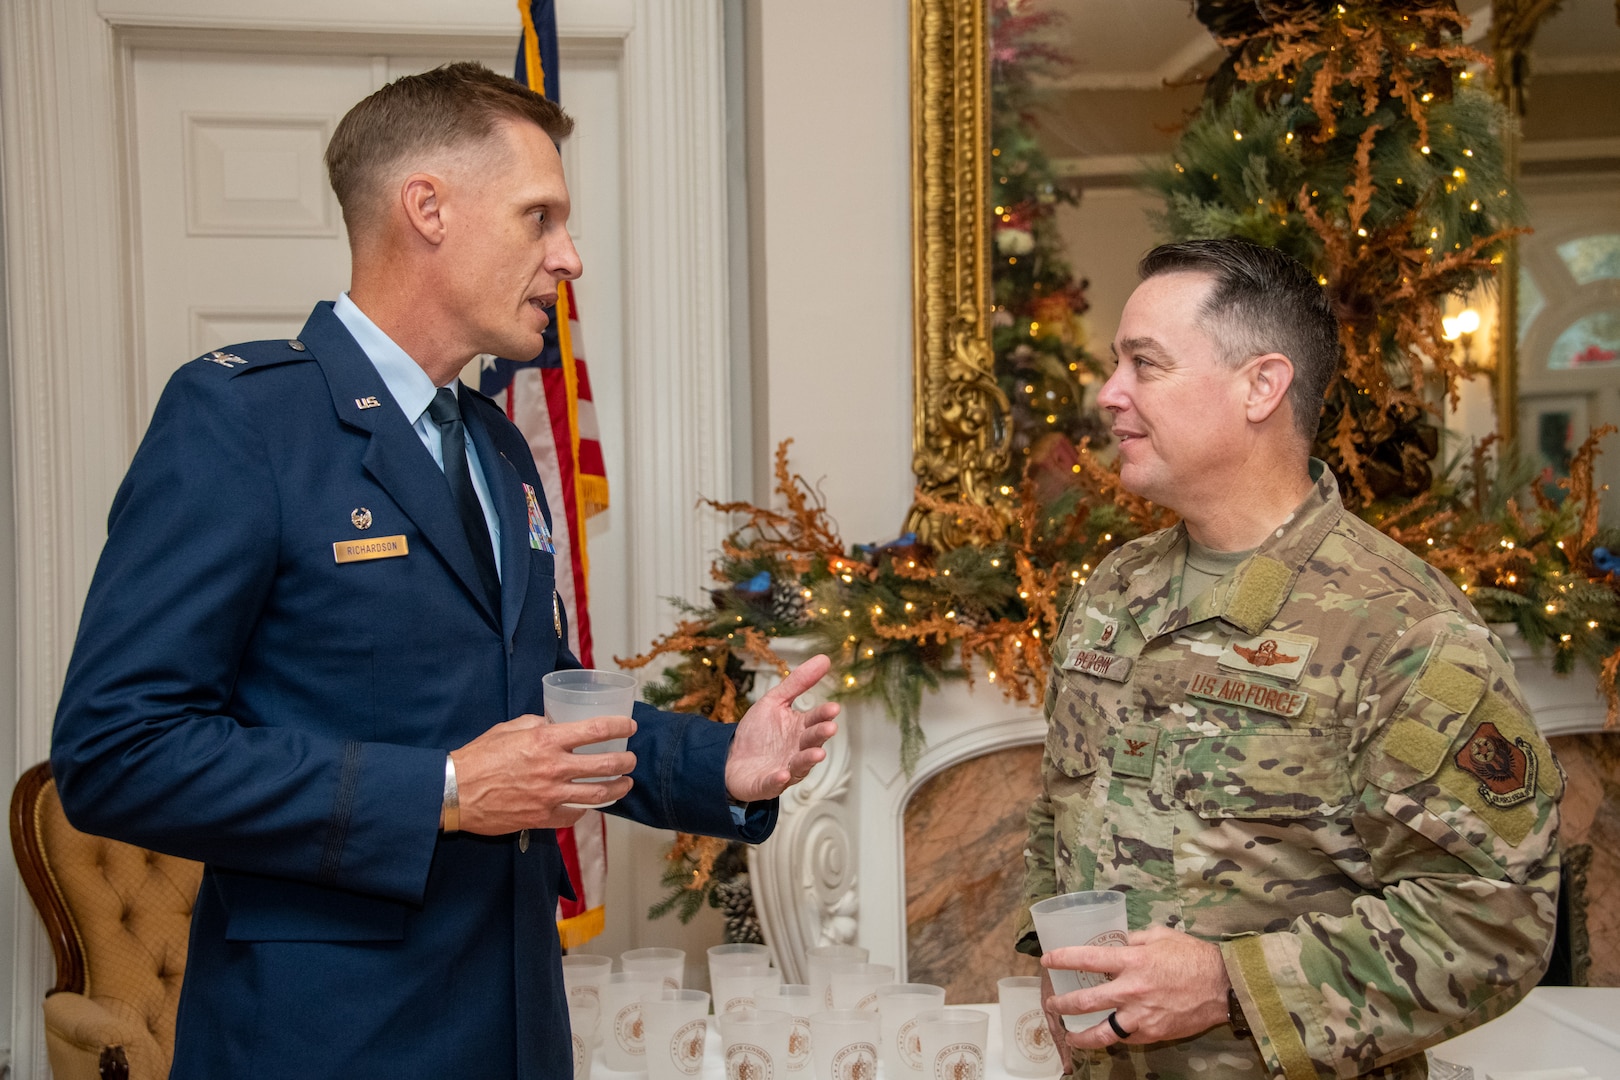 Col. Ryan Richardson, Commander, 42nd Air Base Wing, Maxwell Air Force Base, chats with Col. Jeremy Bergin, Commander, 27th Special Operations Wing